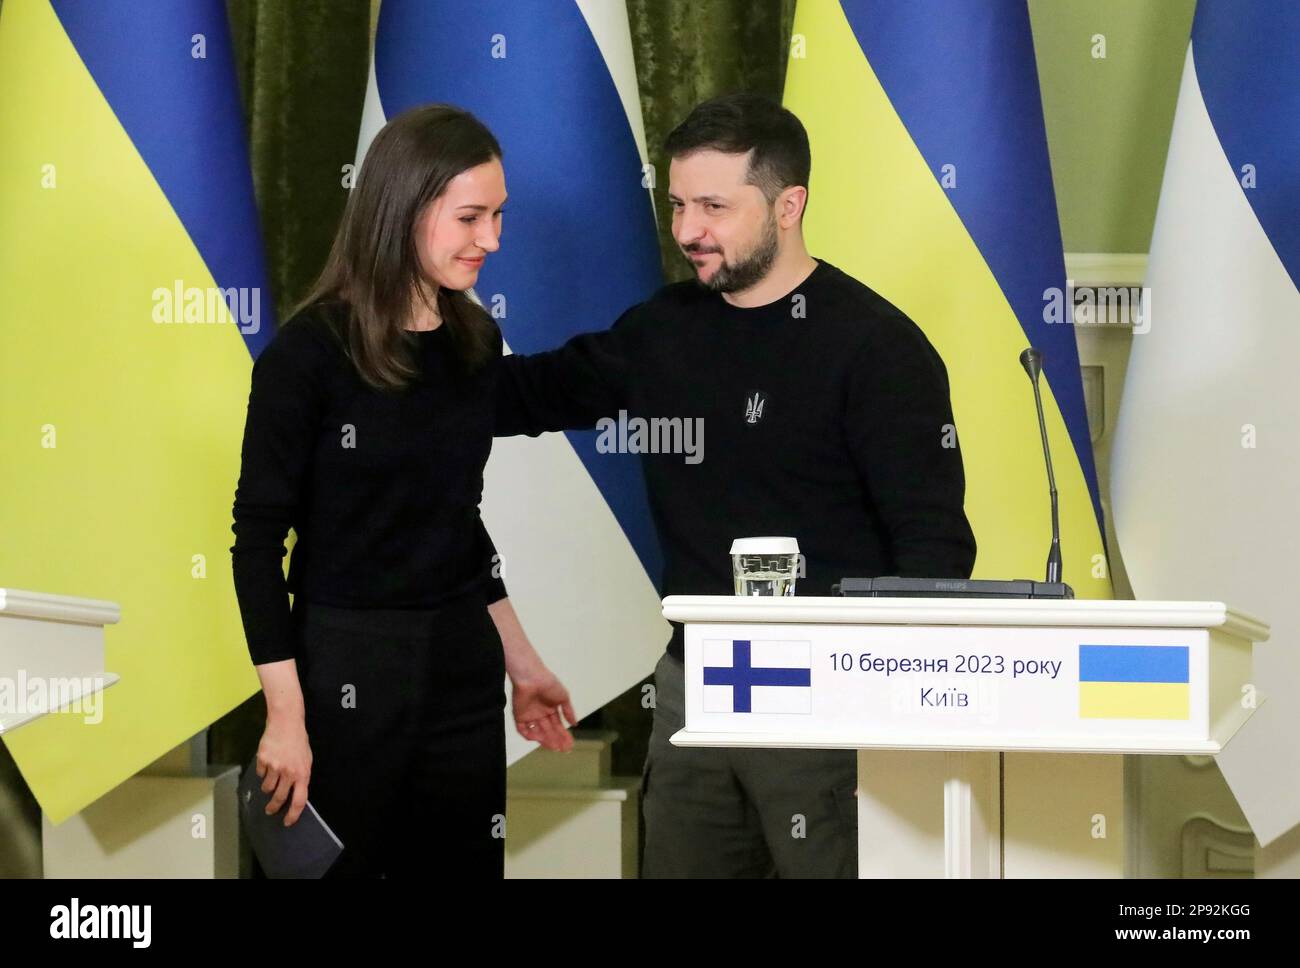 Non Exclusive: KYIV, UKRAINE - MARCH 10, 2023 - President of Ukraine Volodymyr Zelenskyy (R) and Prime Minister of the Republic of Finland Sanna Marin Stock Photo